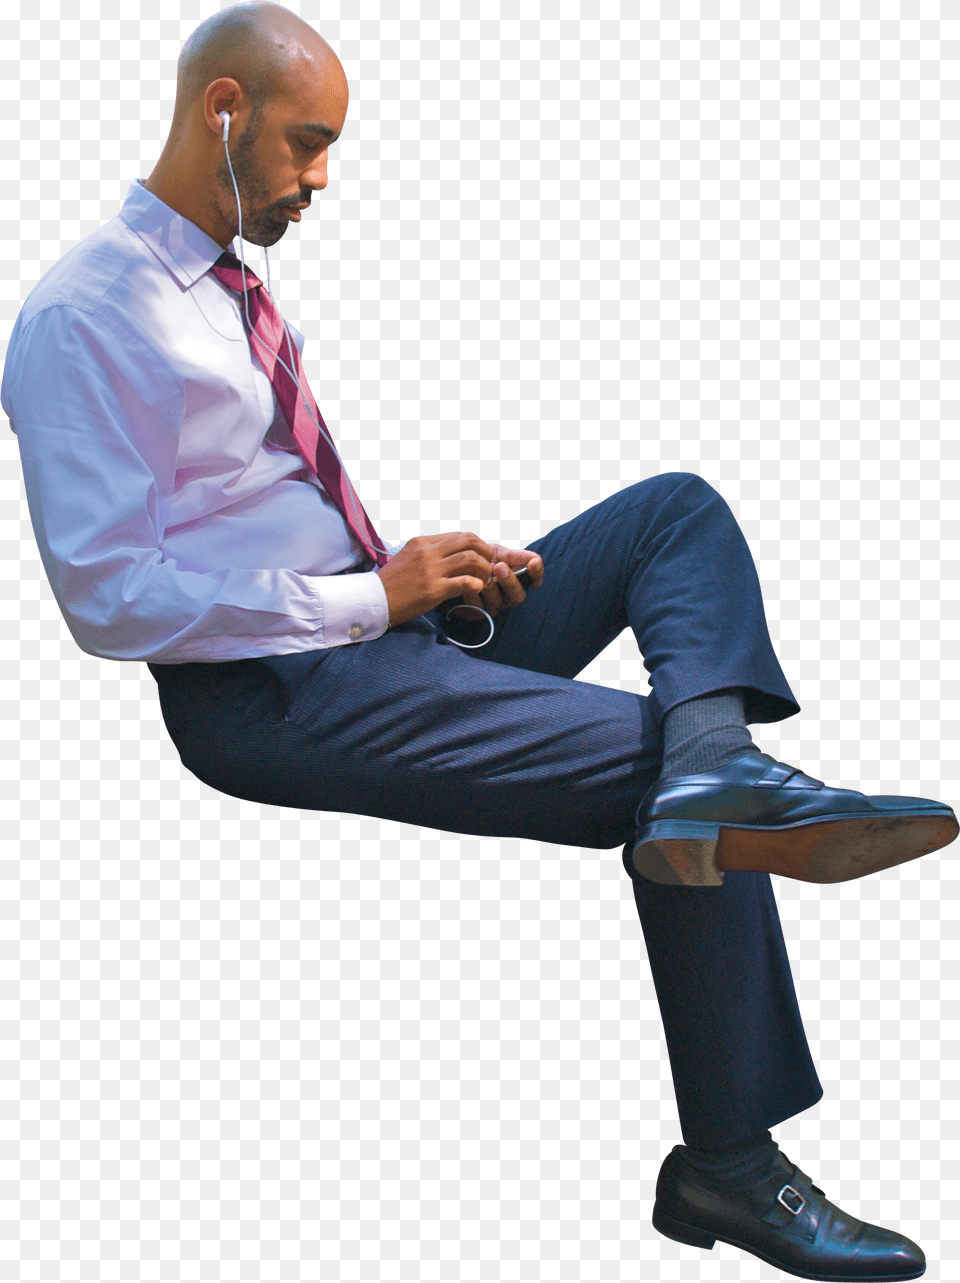 Clip Art Man Images Free Download People Cutout Sitting, Accessories, Shoe, Shirt, Person Png